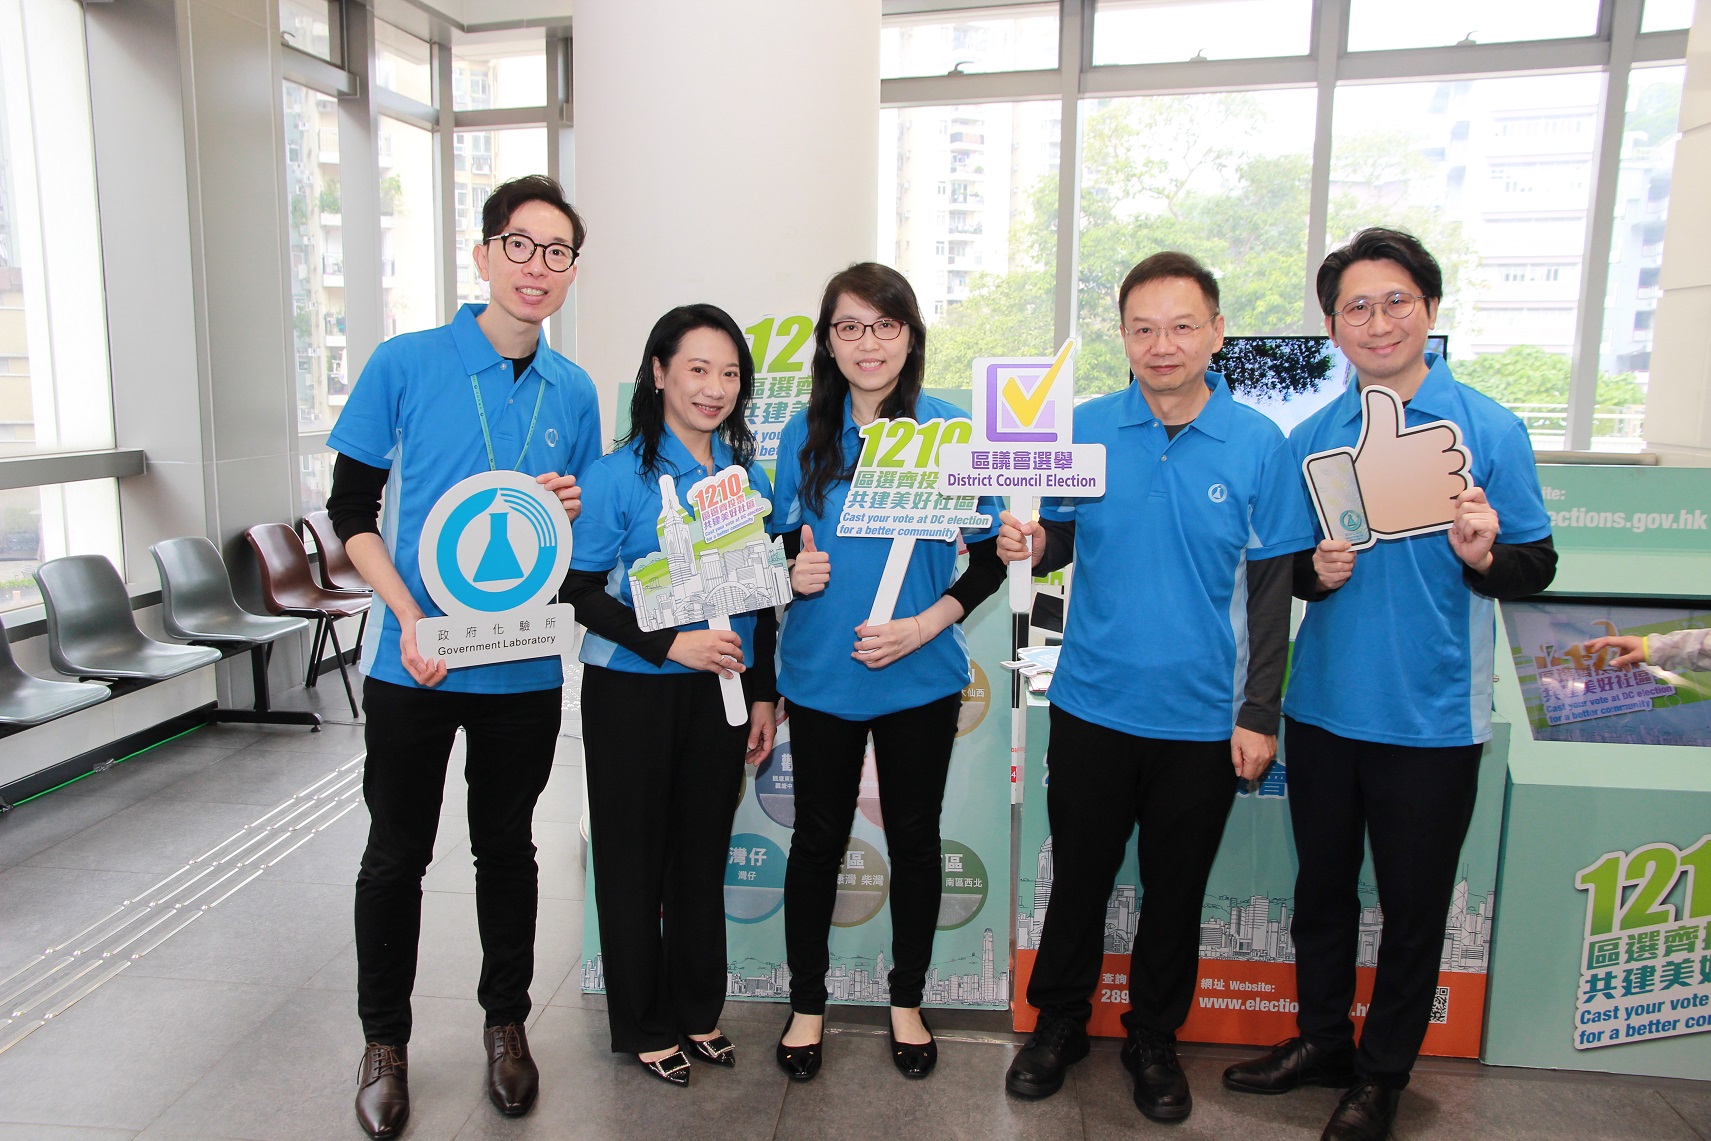 Photo 1: The Government Chemist, Dr LEE Wai-on (second right) and his team posing for the publicity activity.